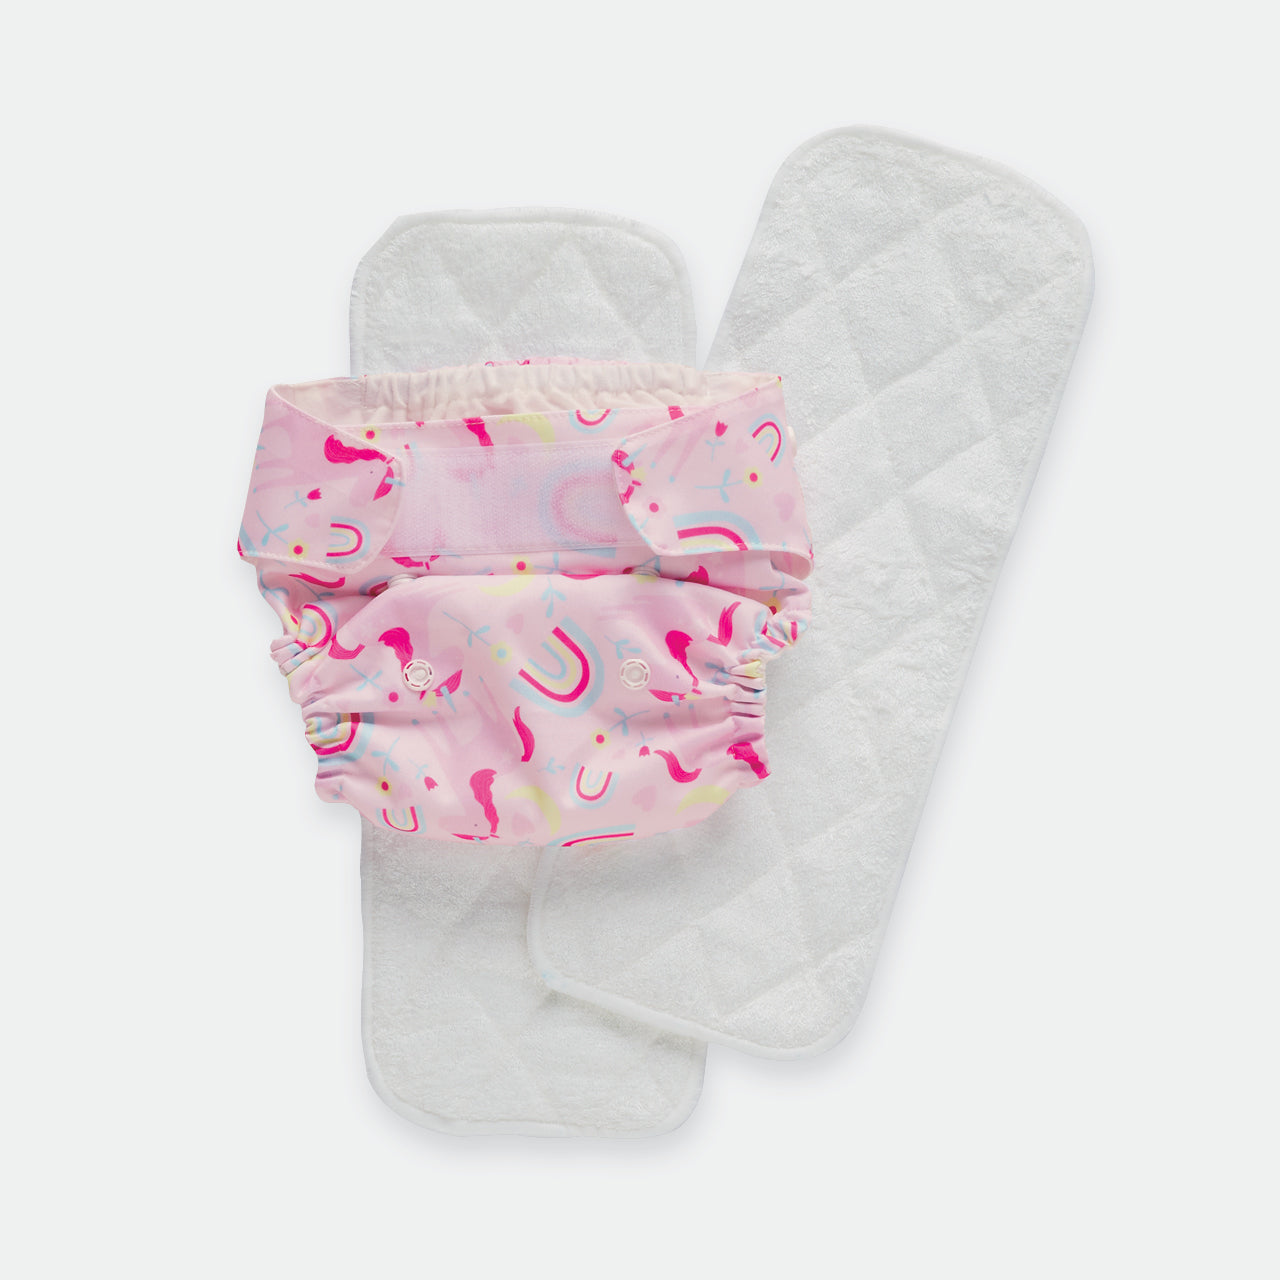 Utopia Reusable Nappy and liners on white background